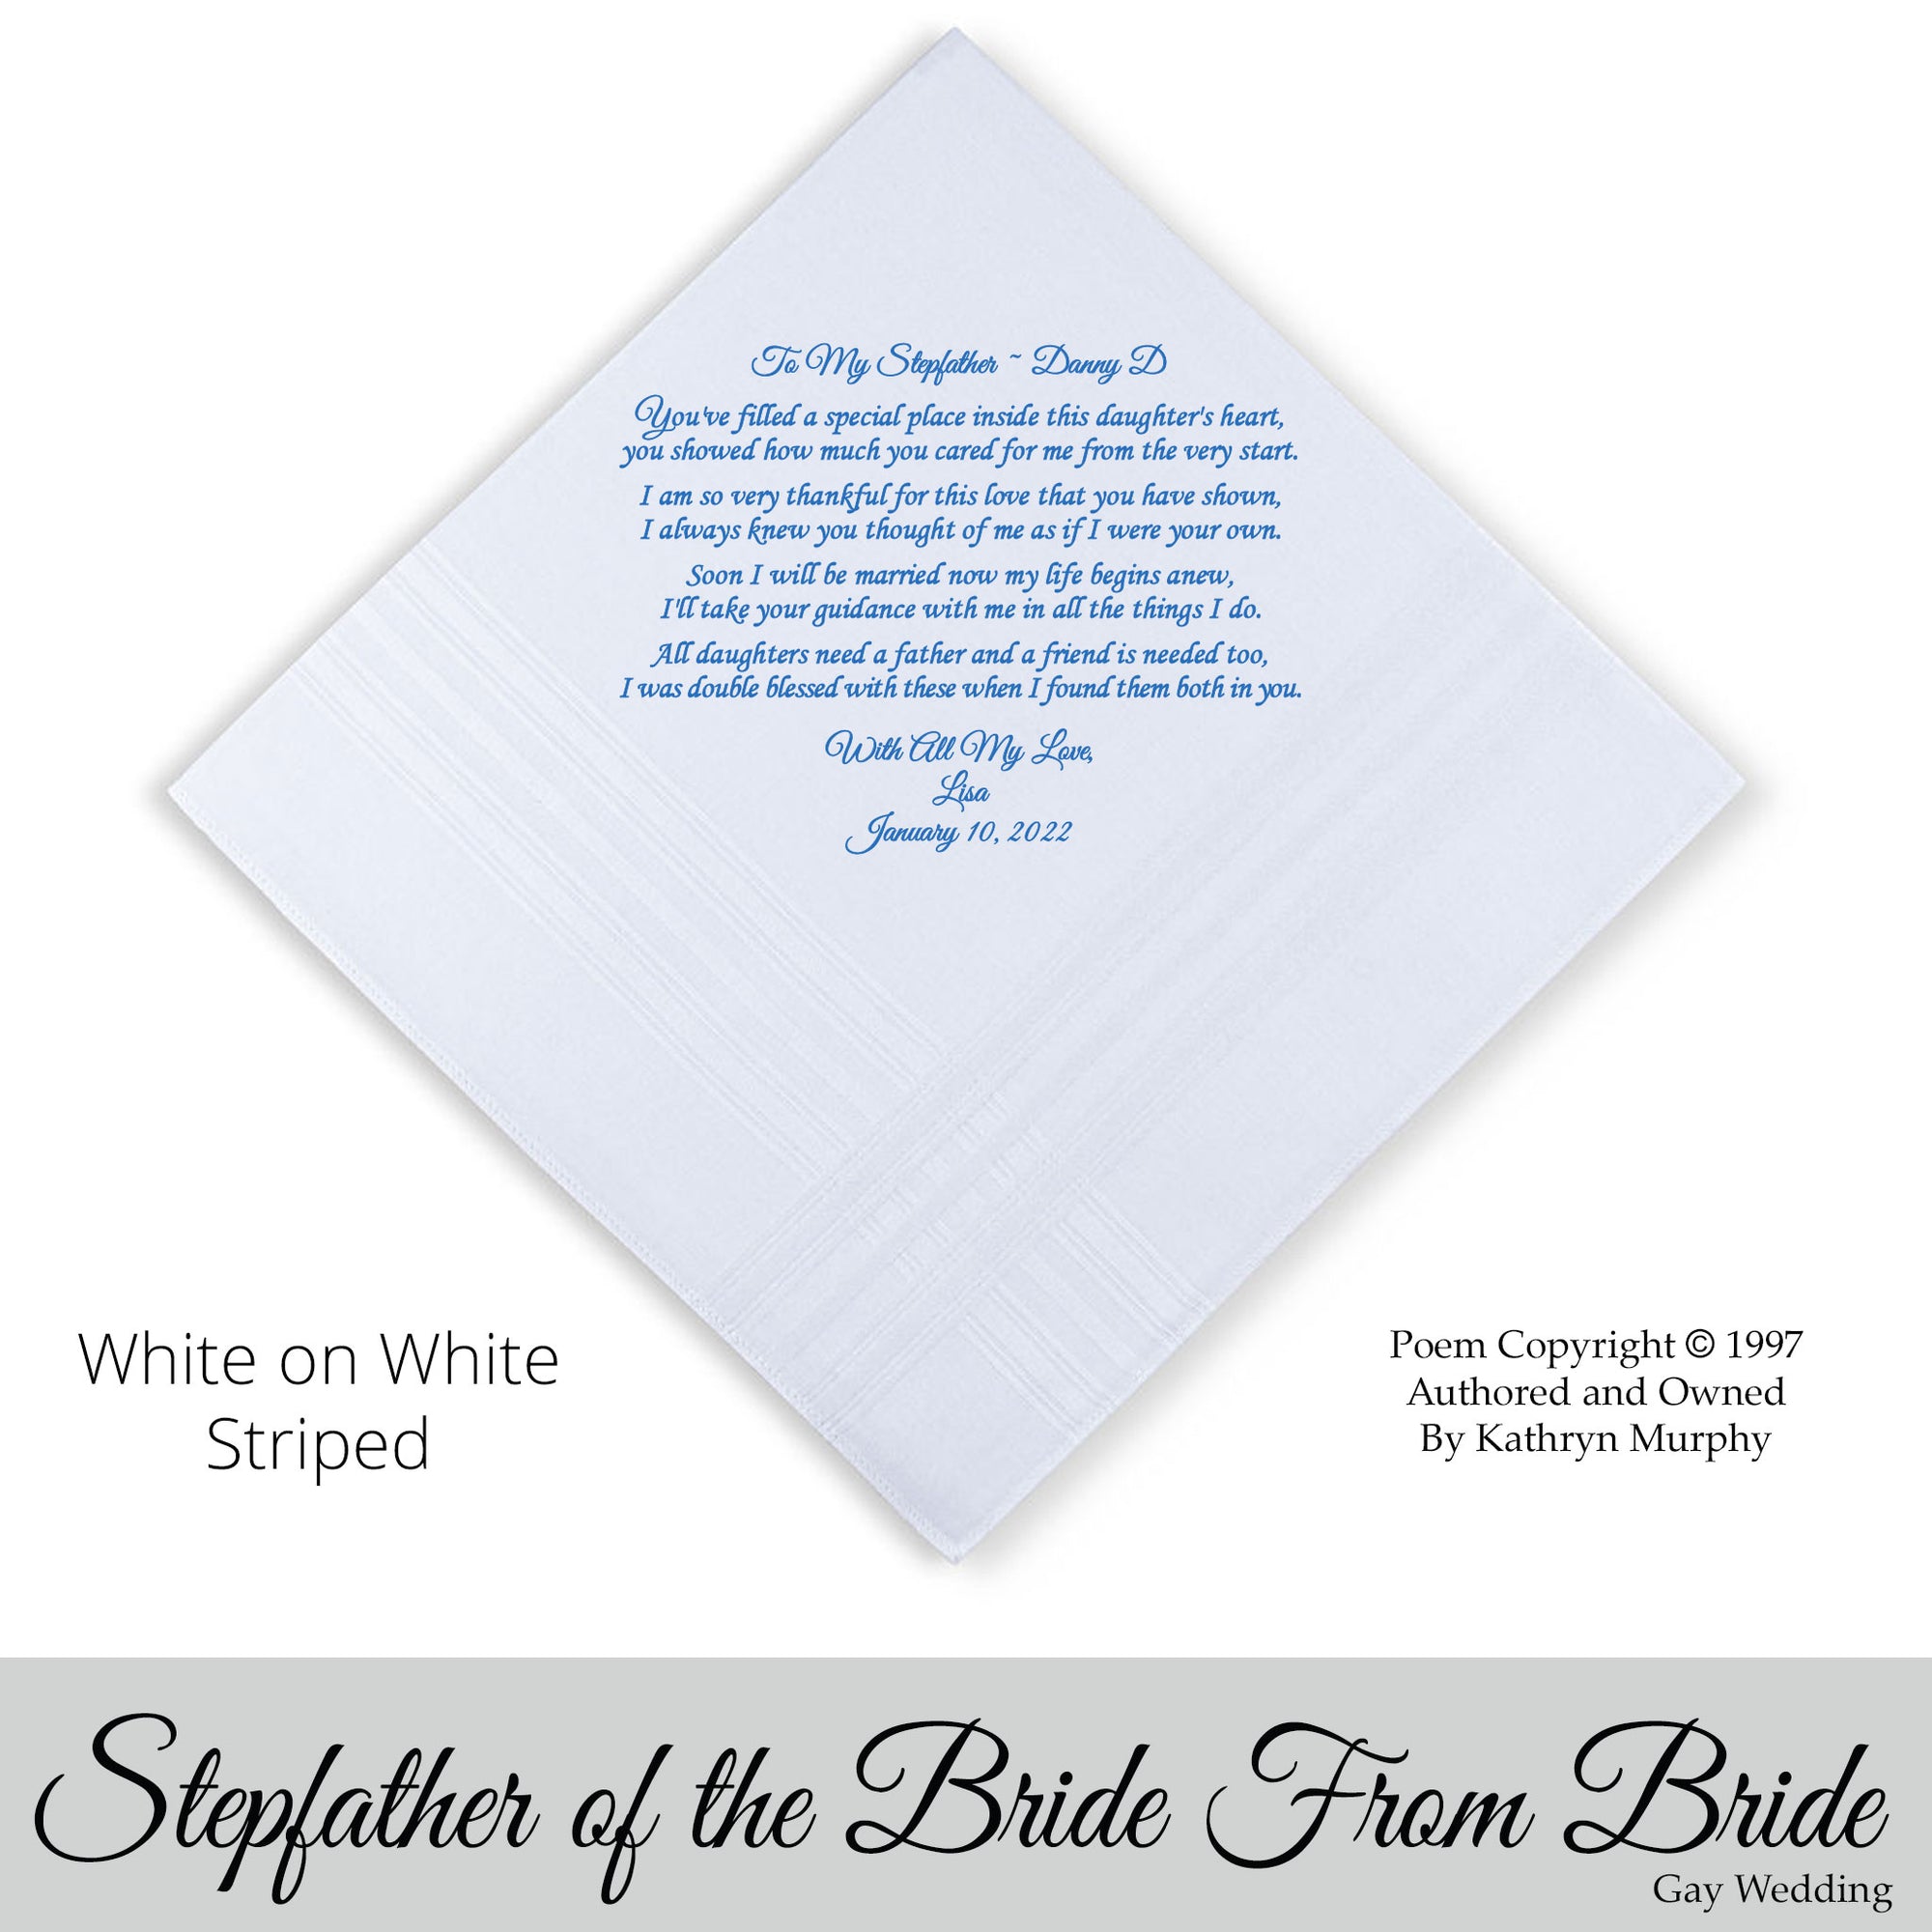 Gay Wedding Gift for the stepfather of the bride poem printed wedding hankie